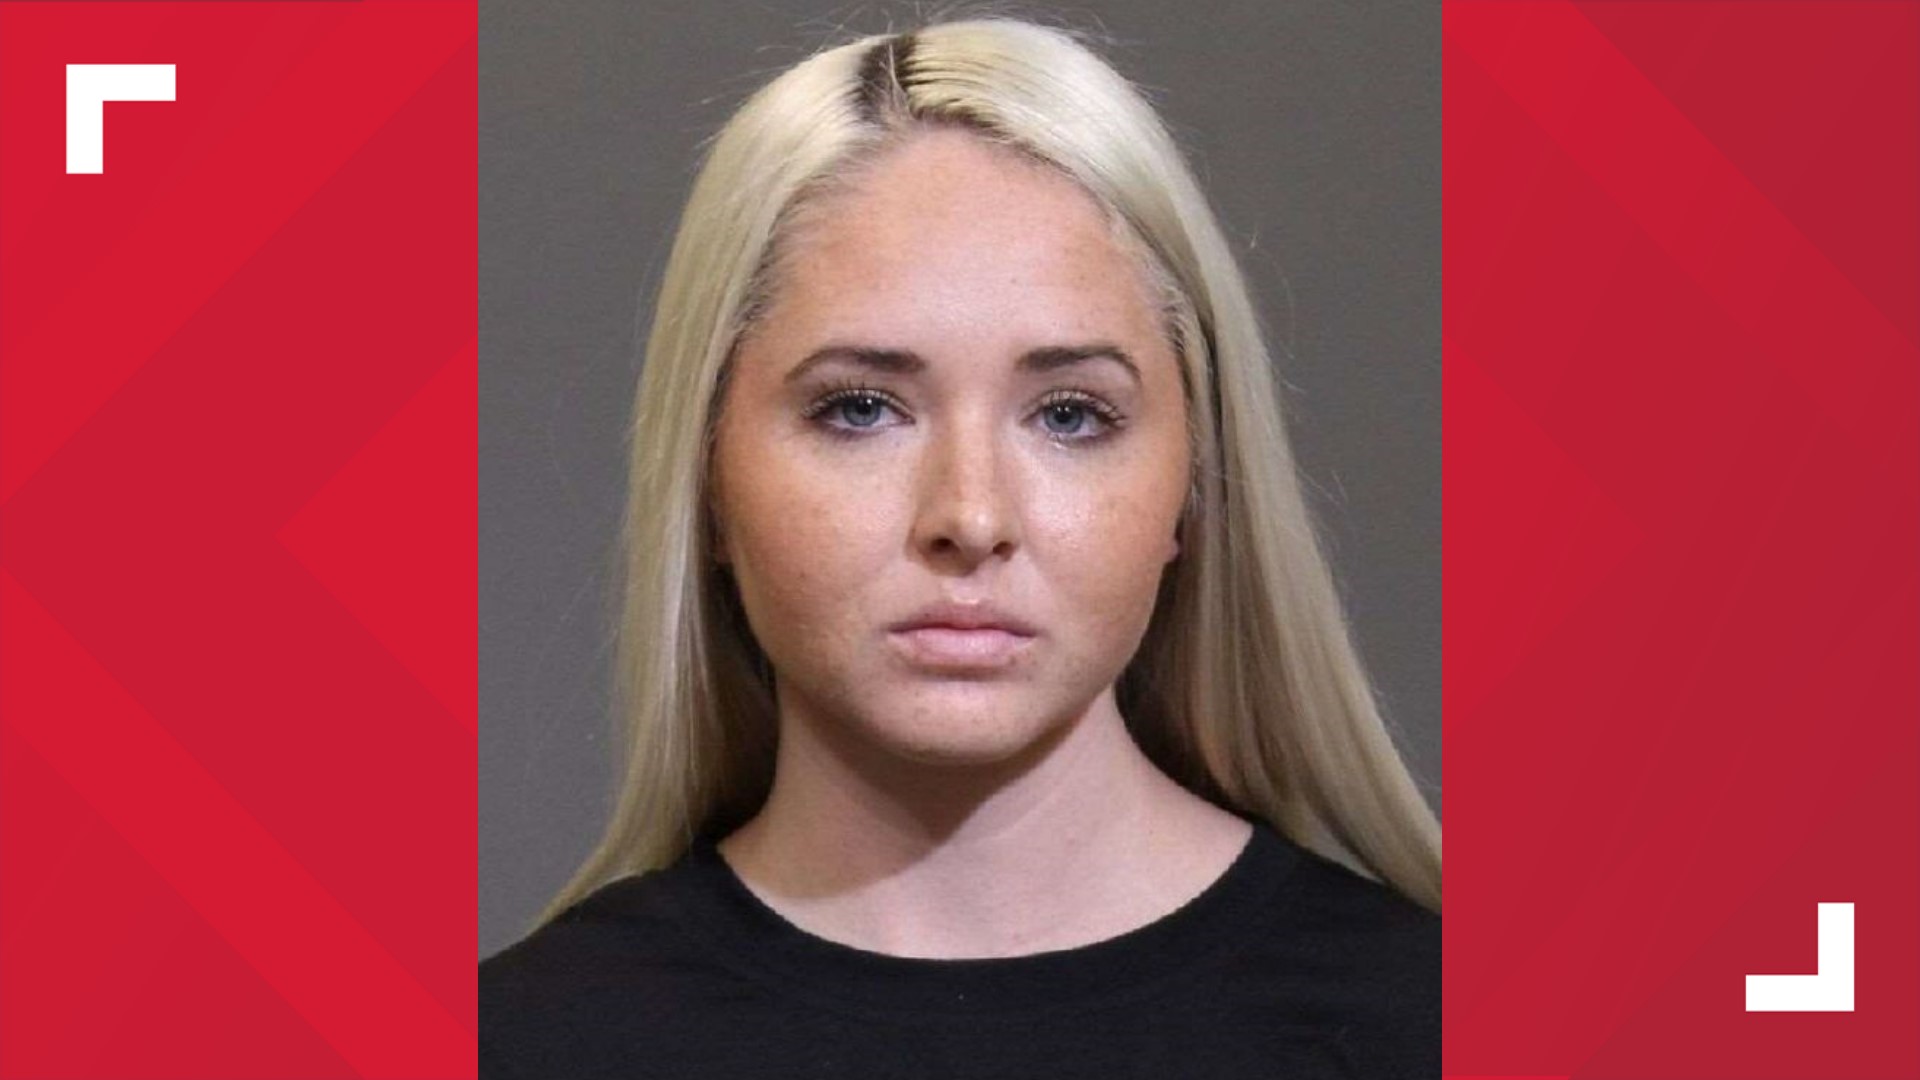 A 24-year-old licensed social worker involved in counseling juveniles was arrested for allegedly engaging in sexual conduct with a 13-year-old boy.